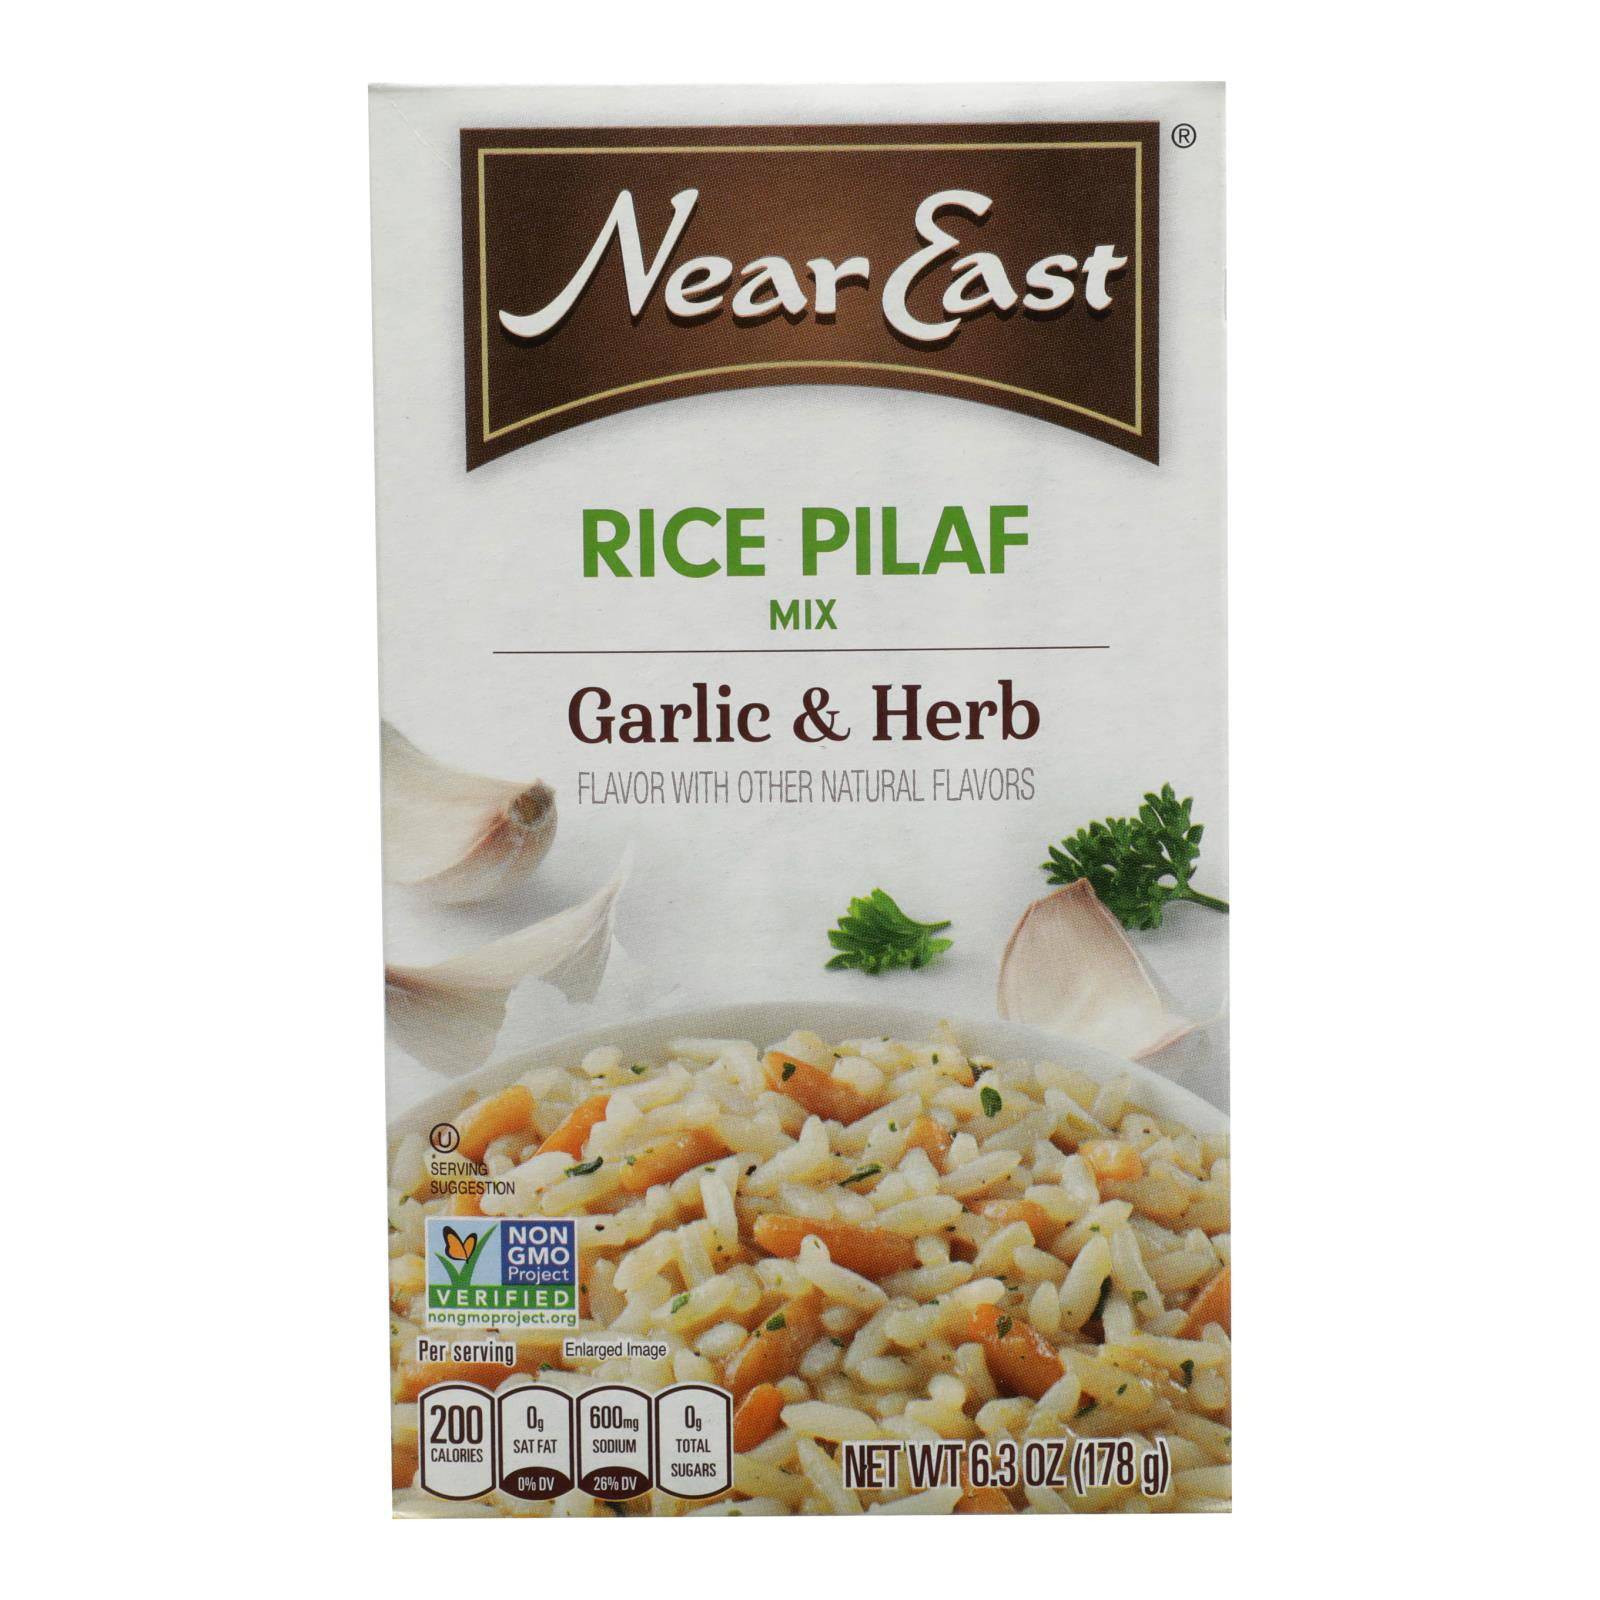 Buy Near East Rice Pilafs - Garlic And Herb - Case Of 12 - 6.3 Oz.  at OnlyNaturals.us